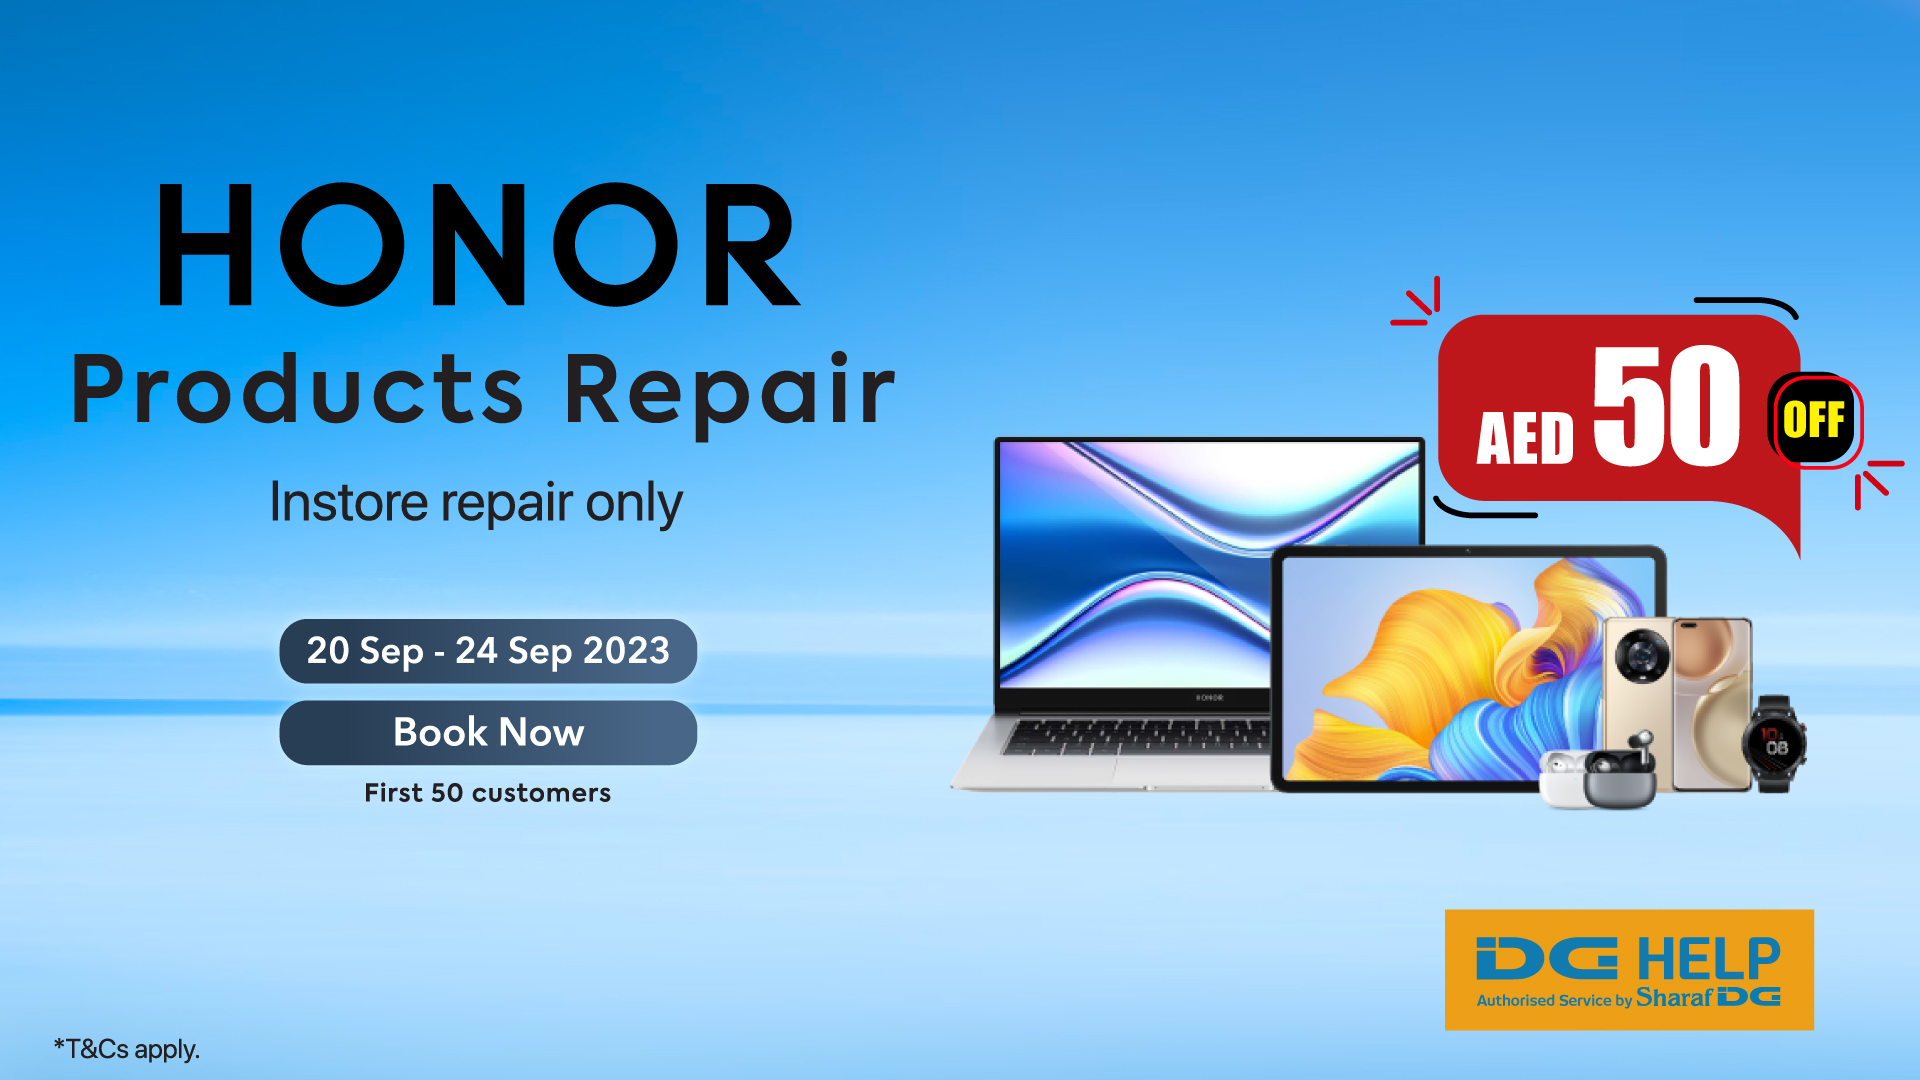 Honor Repair Special: Save AED 50 on Your First Fix